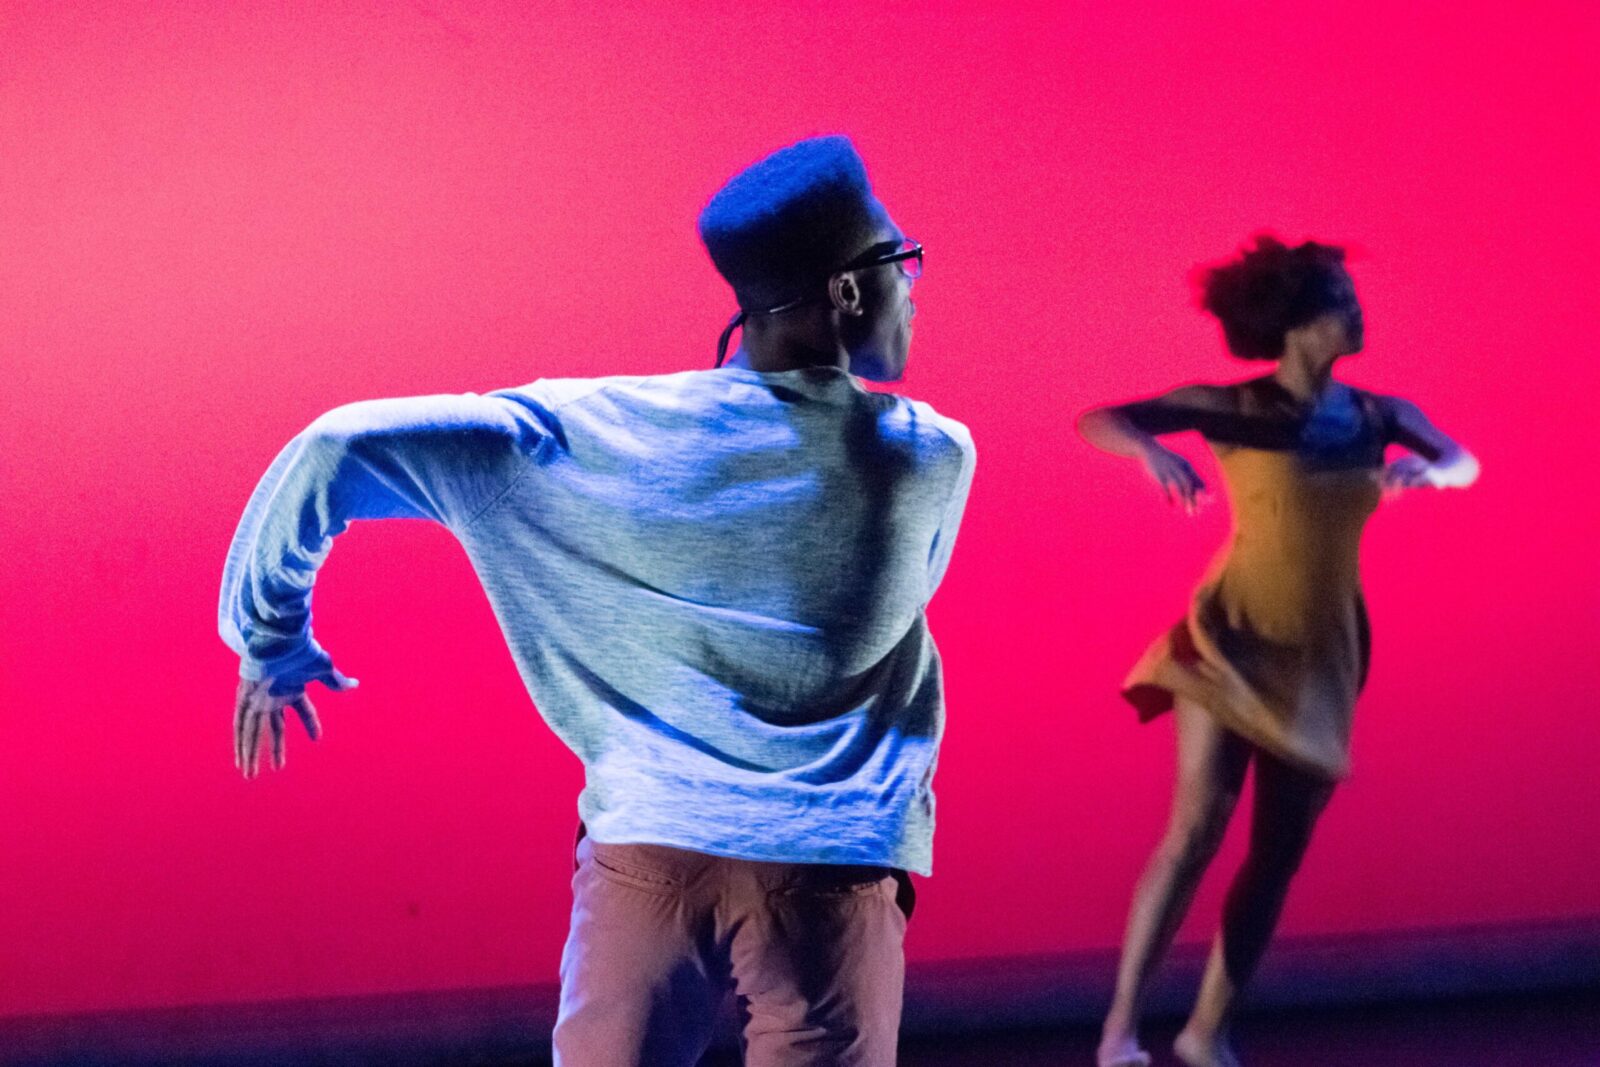 A back of a dancer with left arm outstretched in front of a red screen